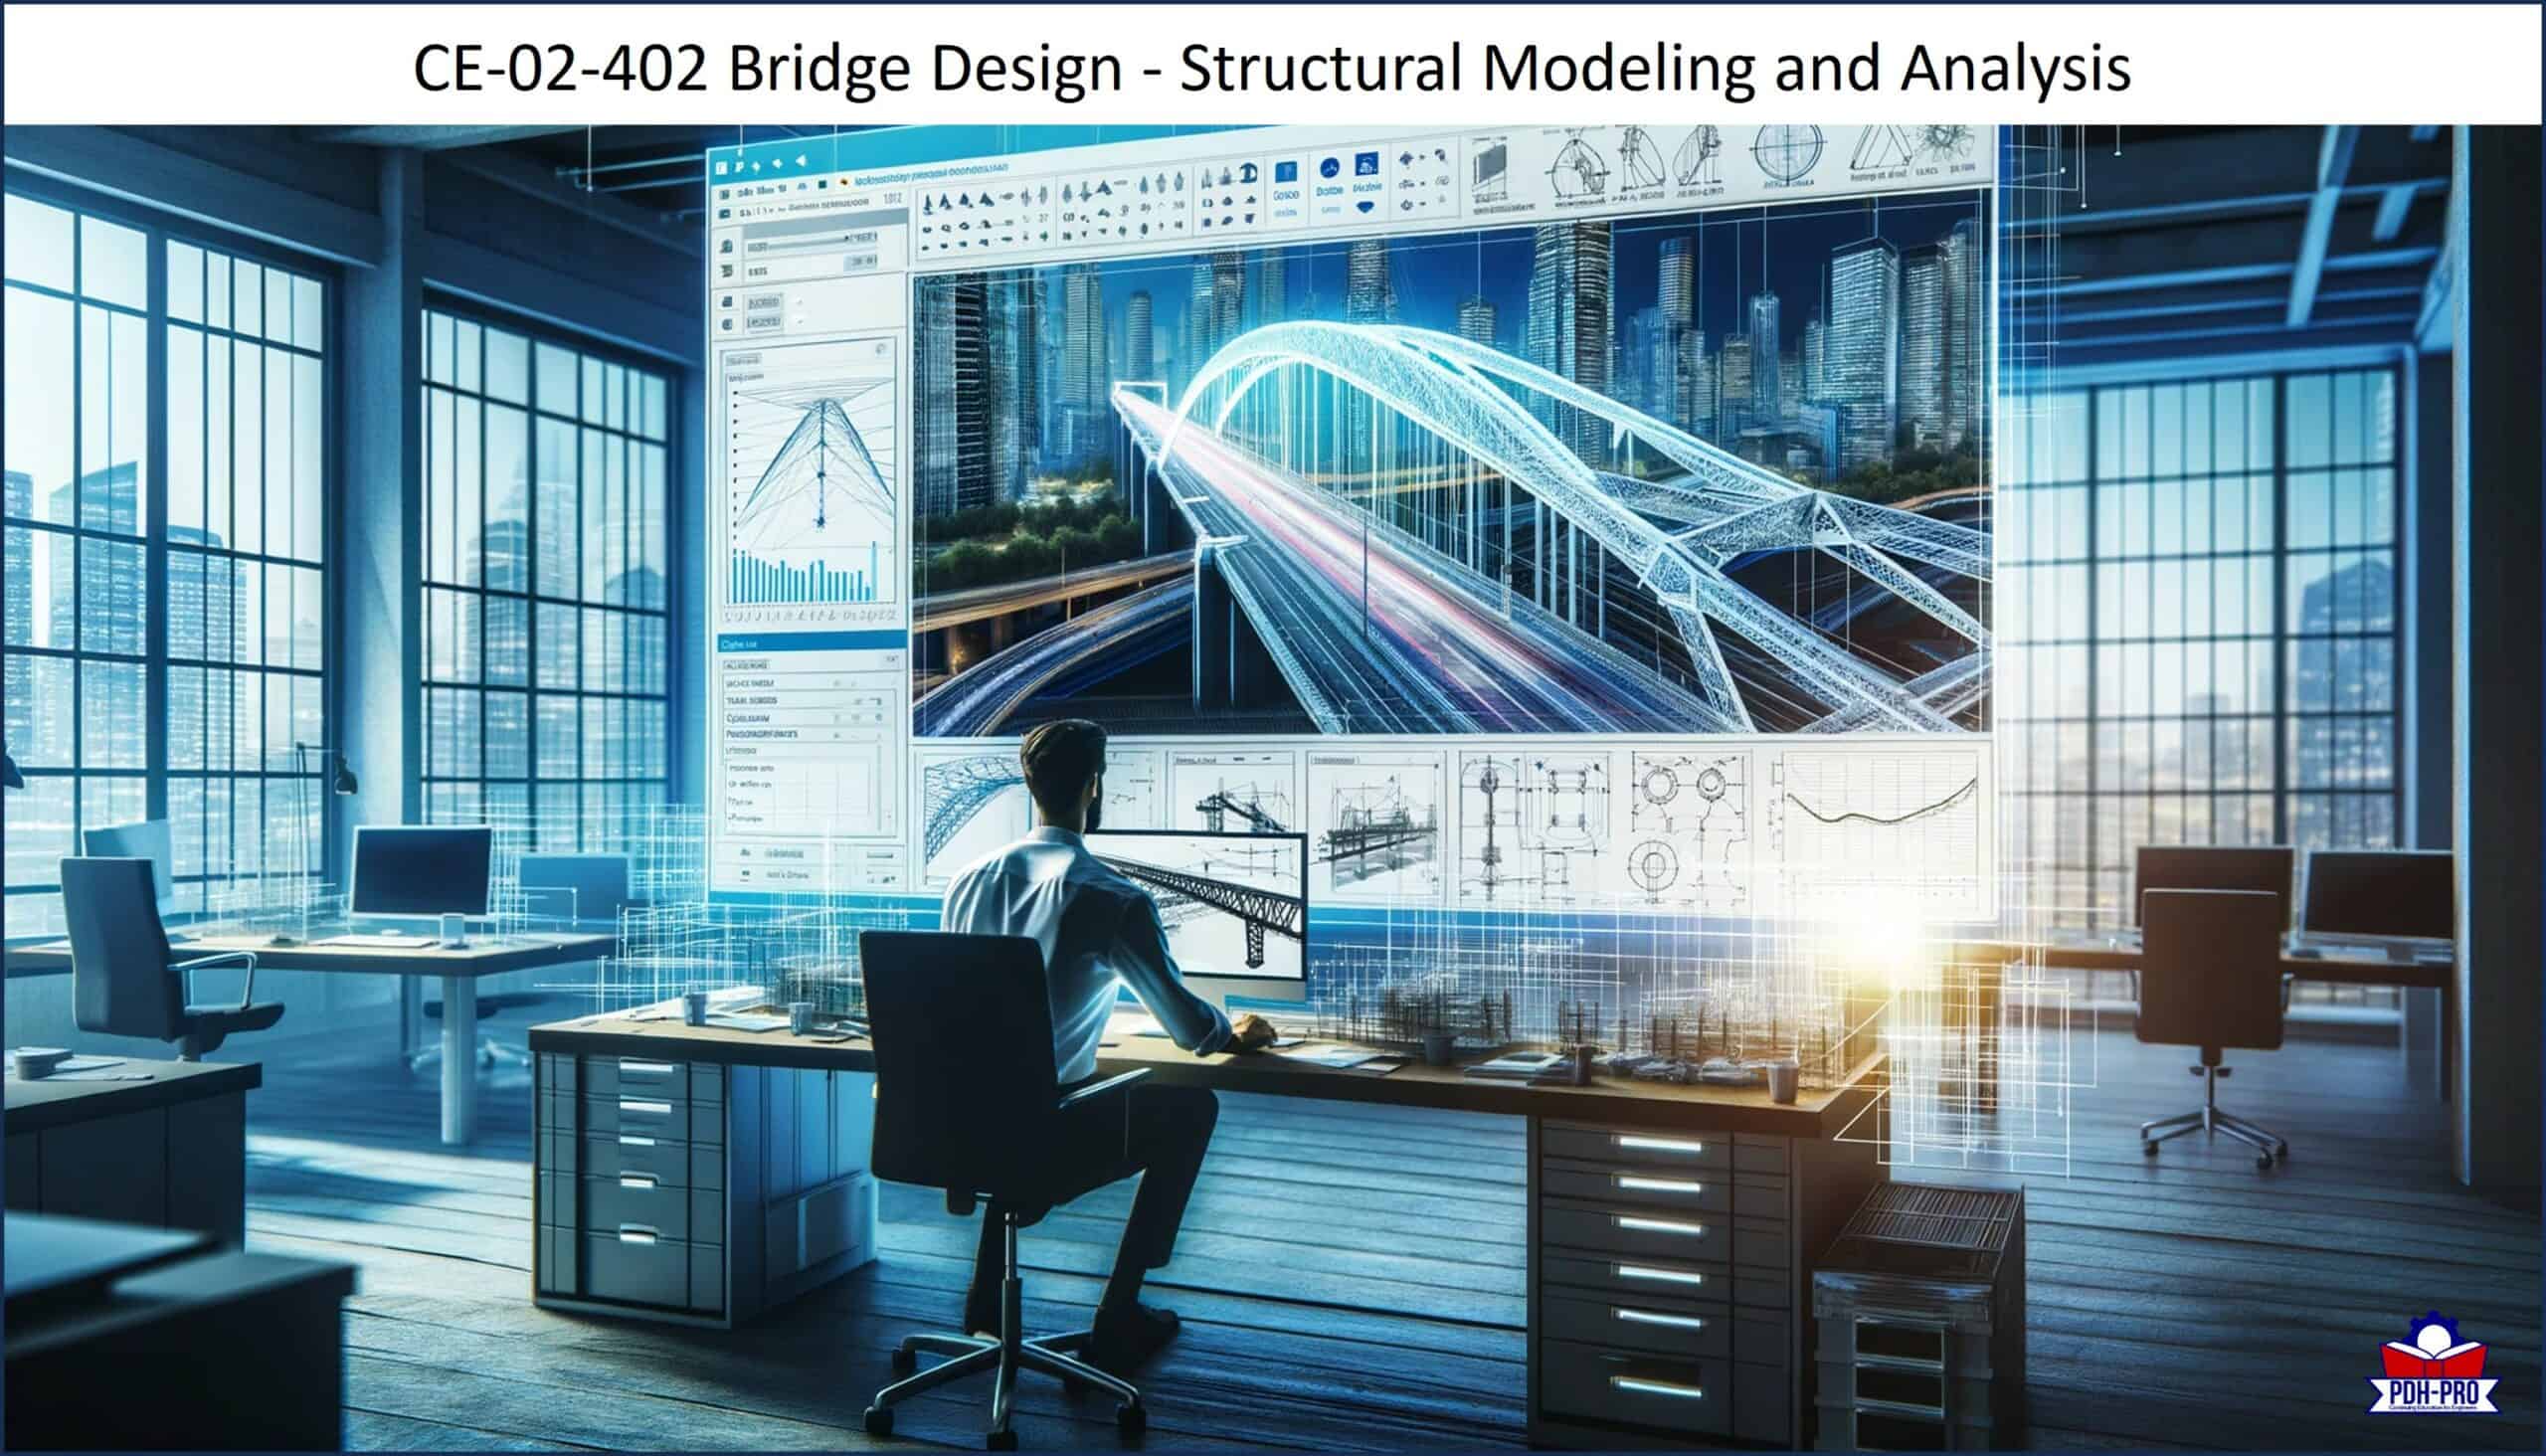 Bridge Design - Structural Modeling and Analysis